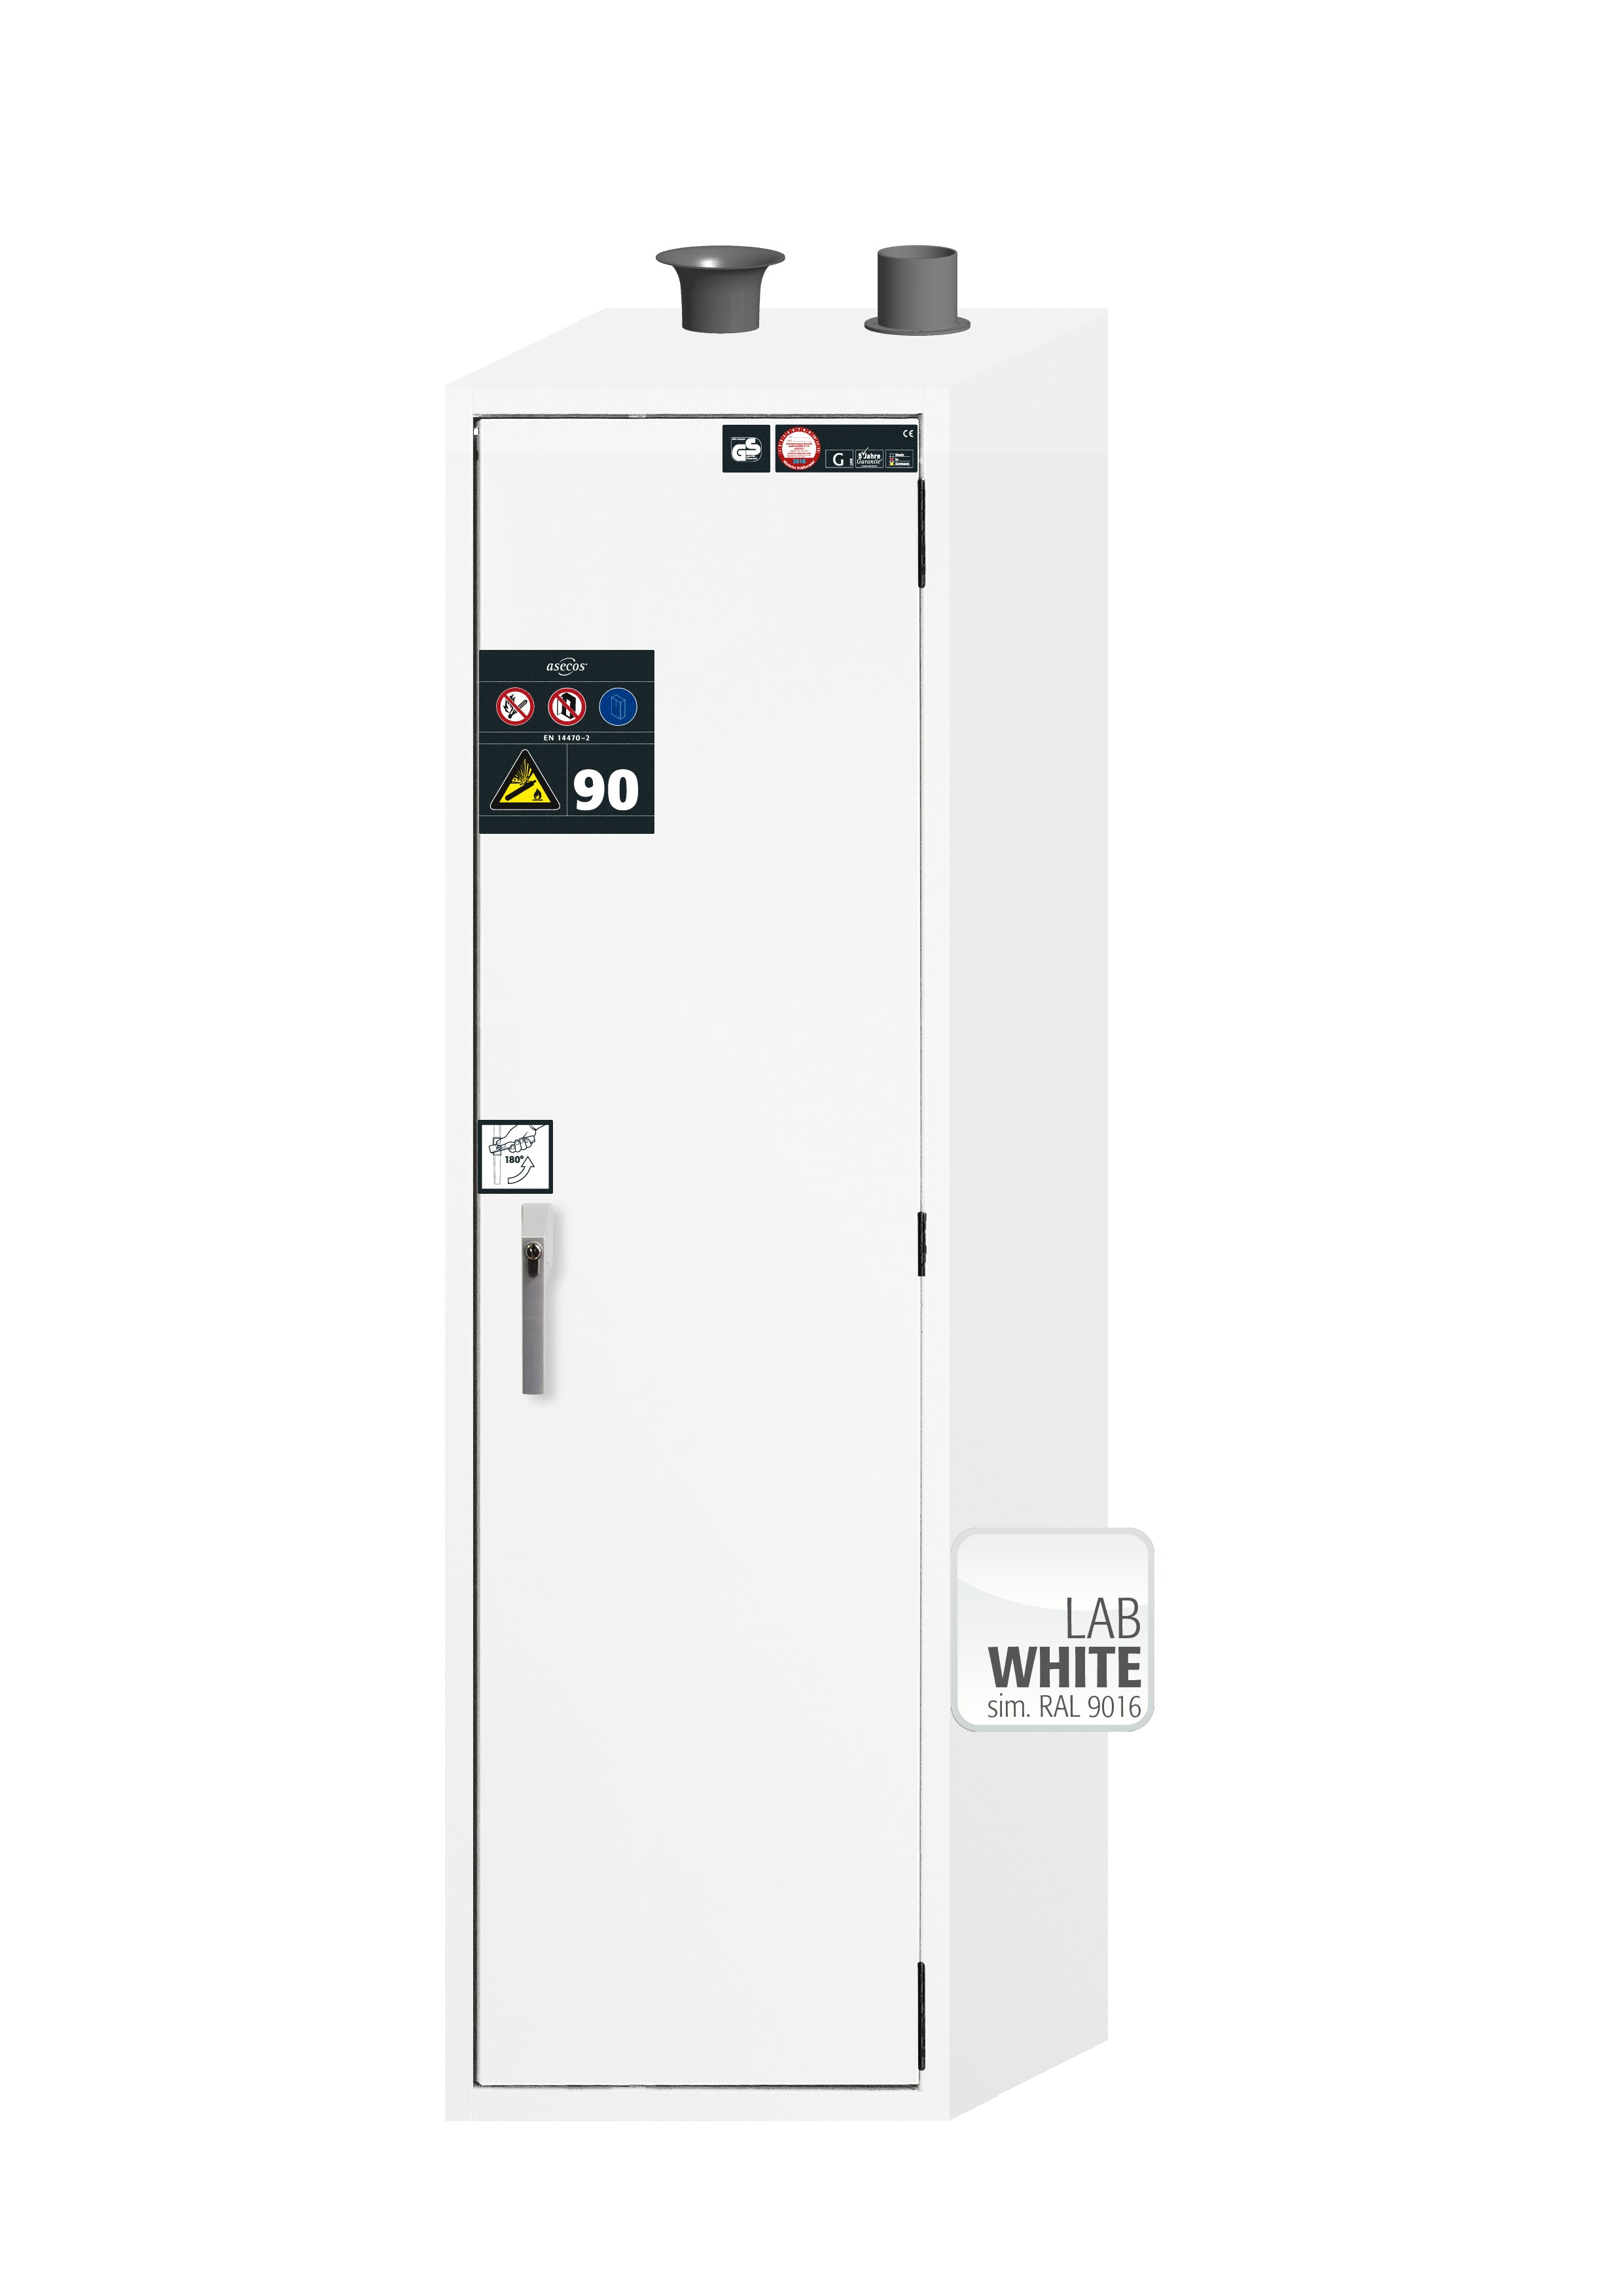 Type 90 compressed gas bottle cabinet G-ULTIMATE-90 model G90.205.060.R in laboratory white (similar to RAL 9016) with for 1x compressed gas bottles of 50 liters each